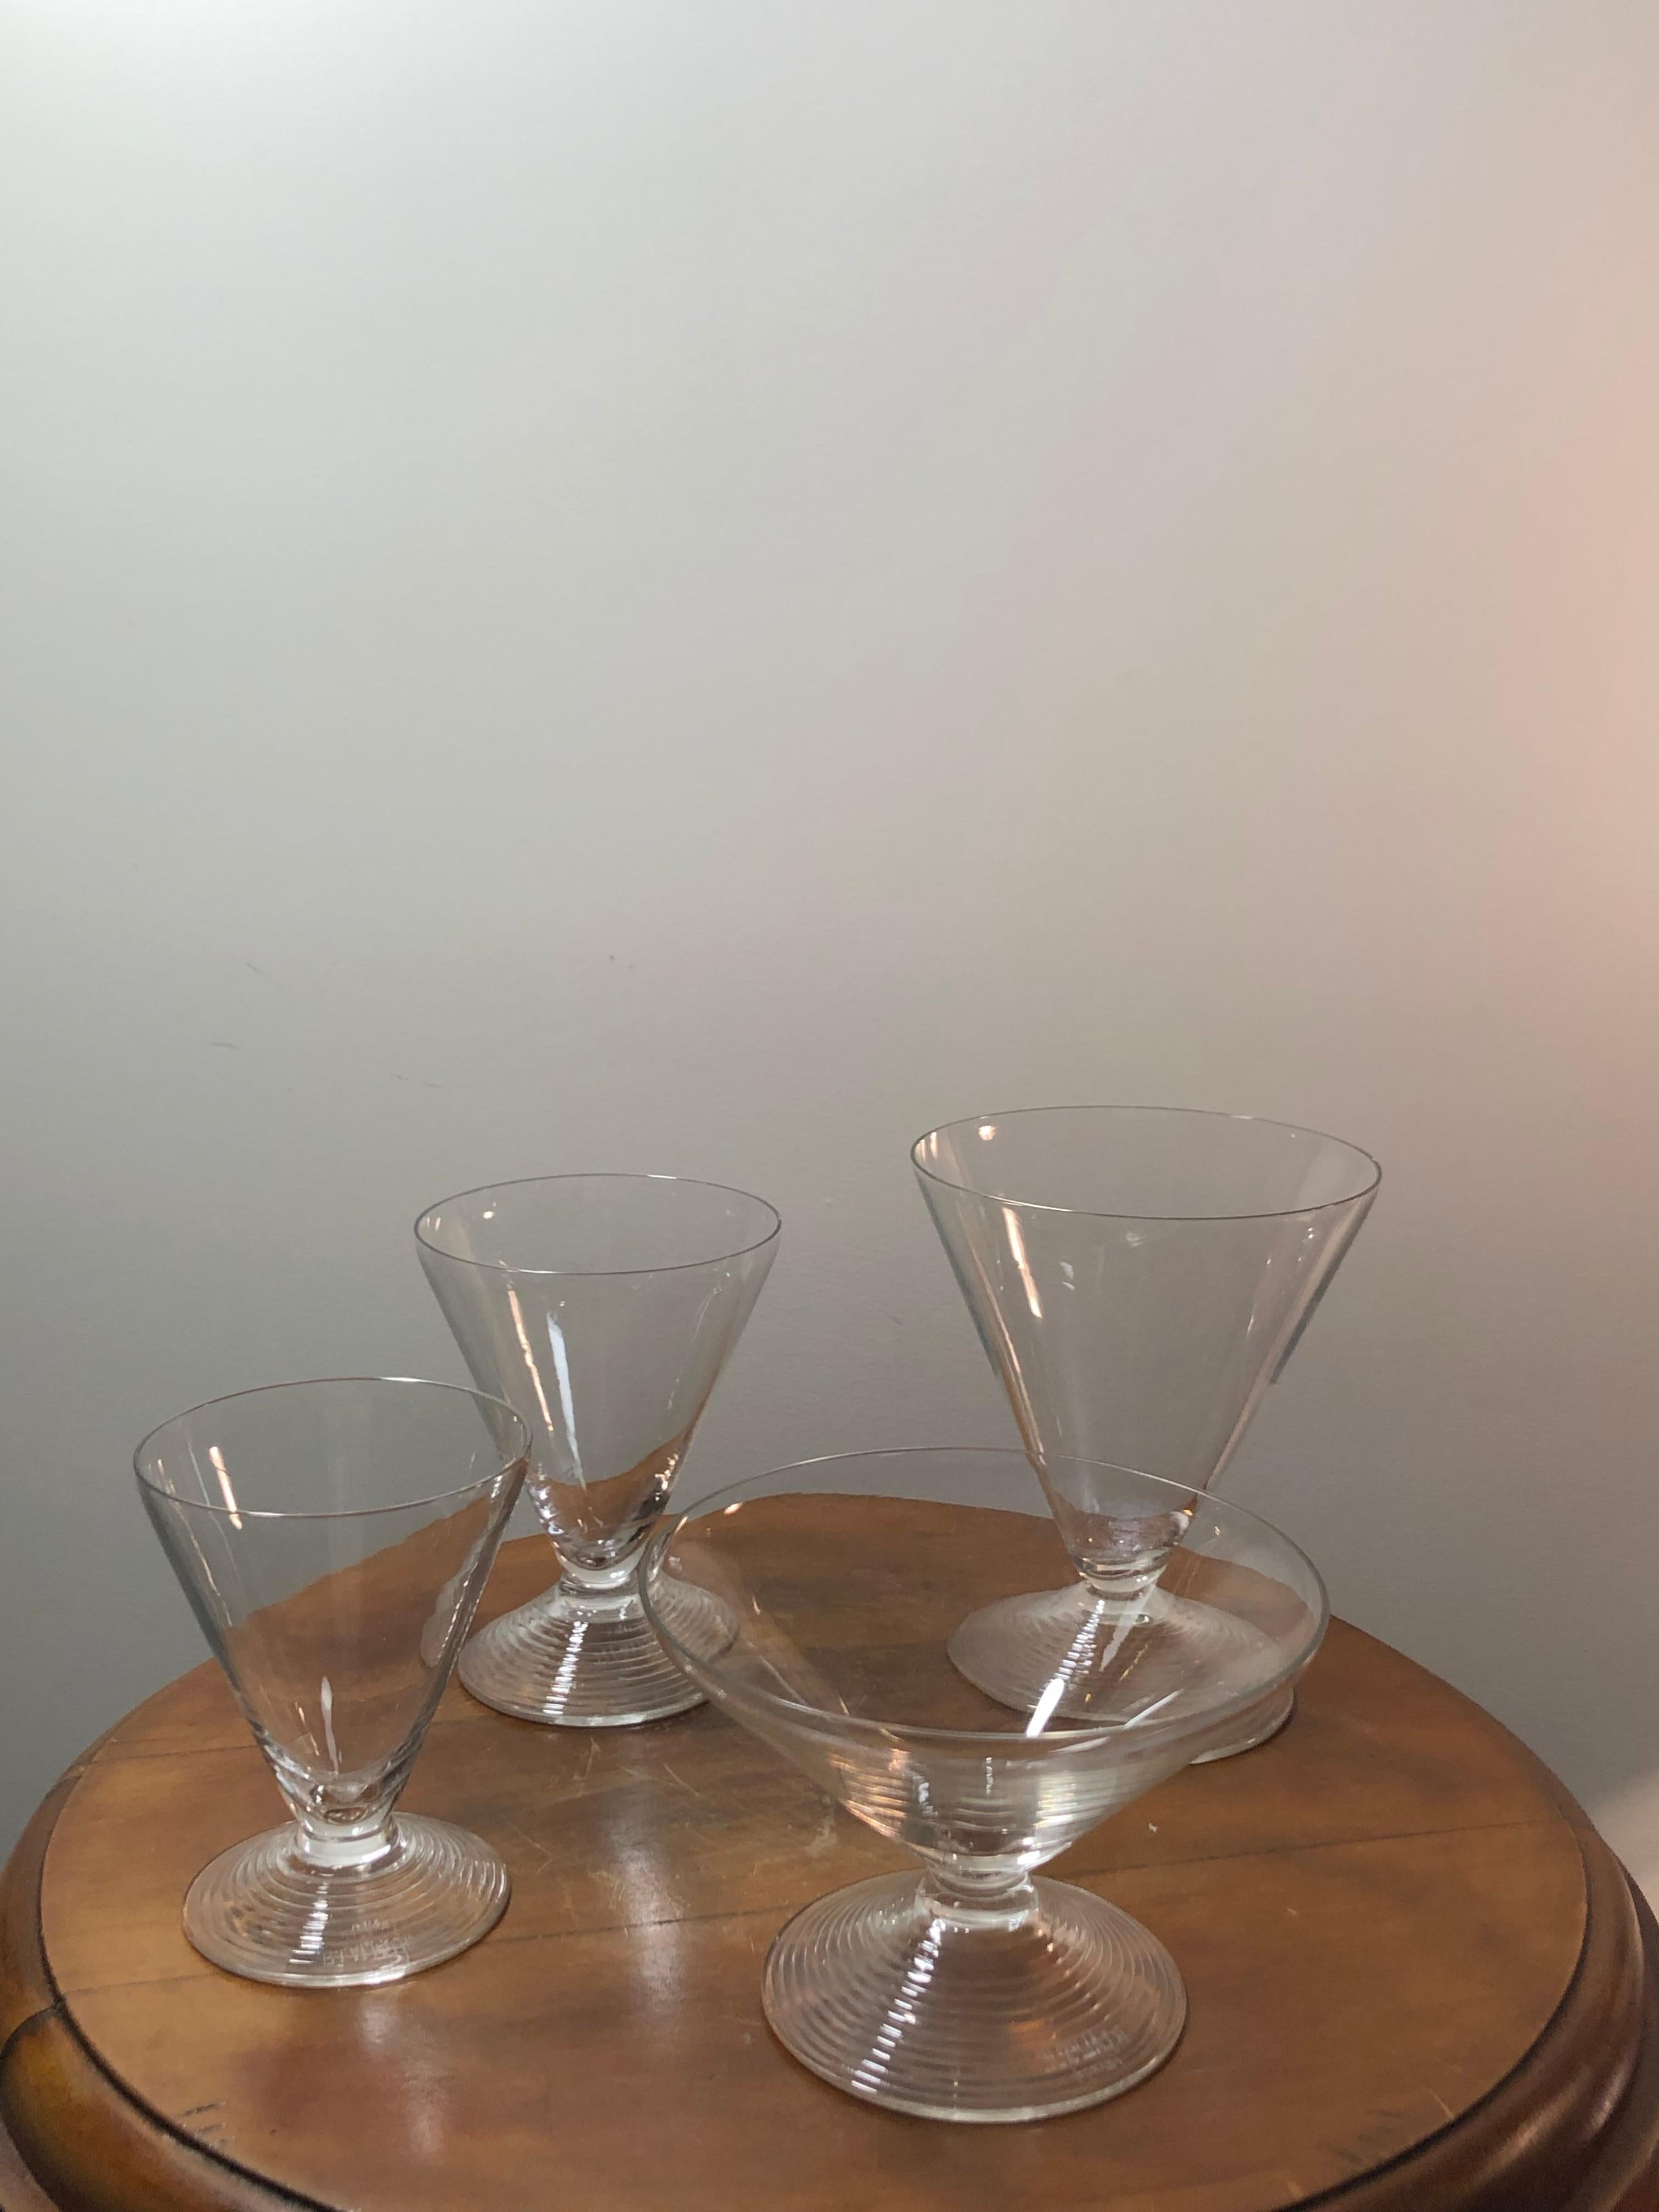 Set of 43 pieces : 40 drinking glasses, 2 pitchers and 1 decanter made by René Lalique in 1937. Model is named 